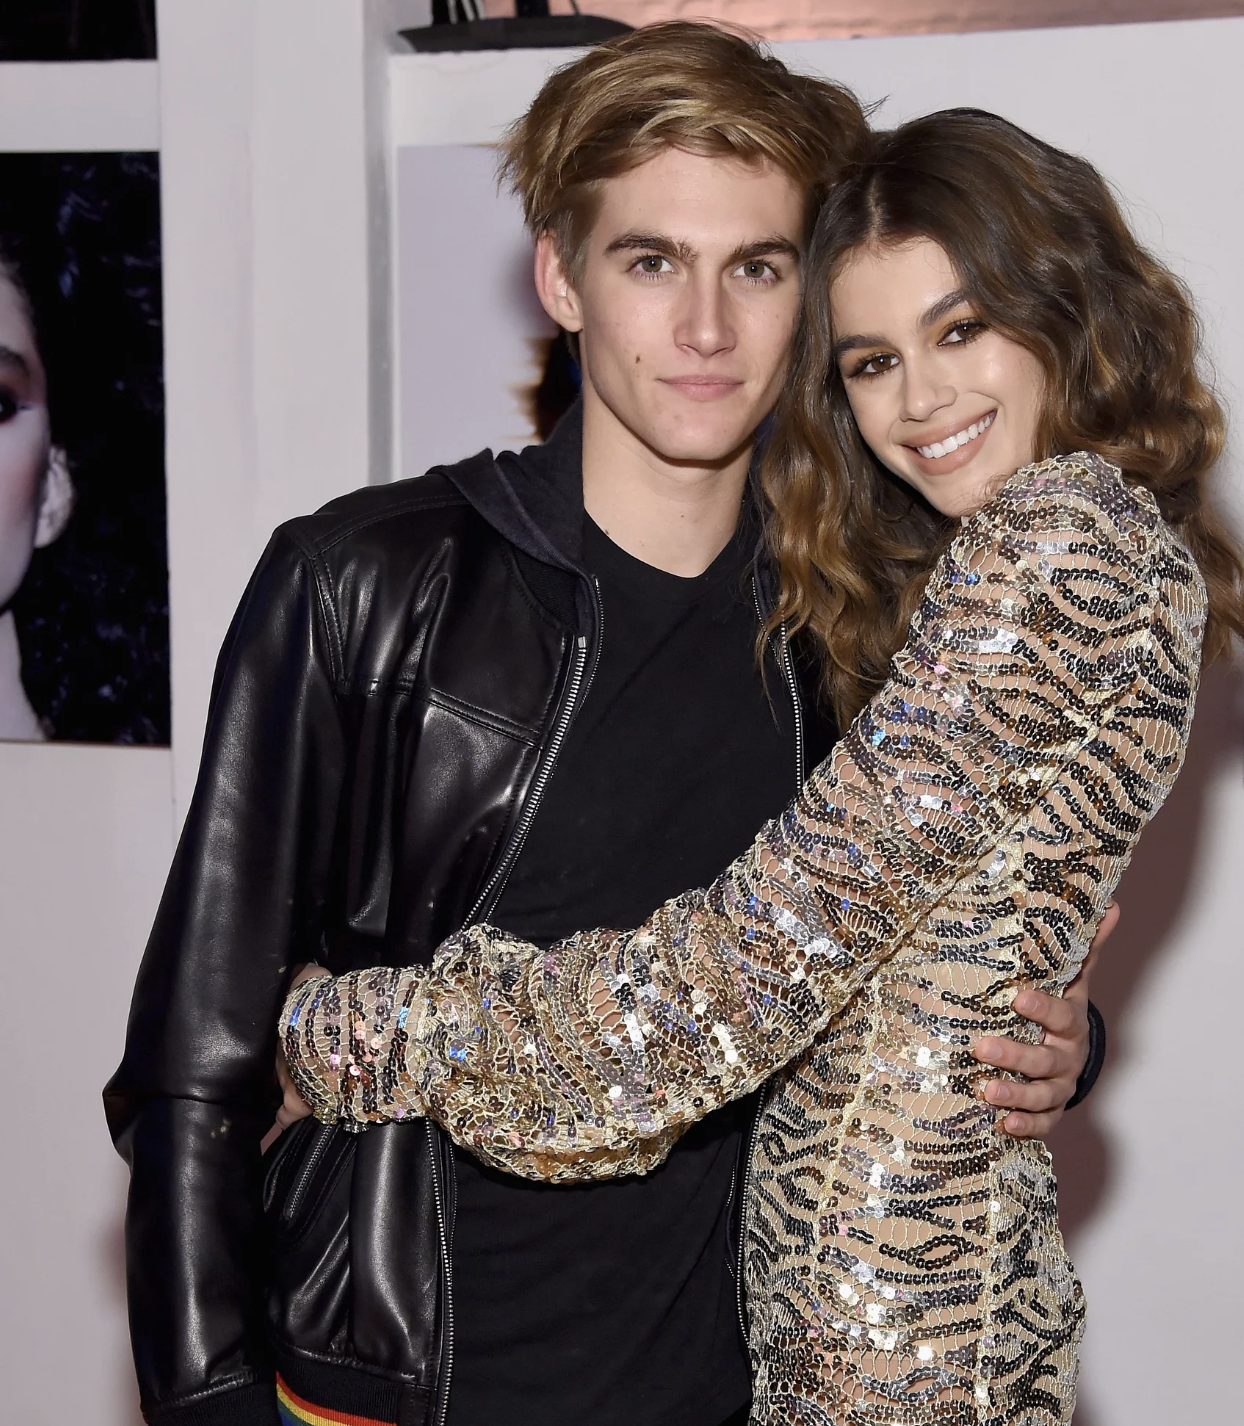 Cindy Crawford's children - Presley and Kaia Gerber